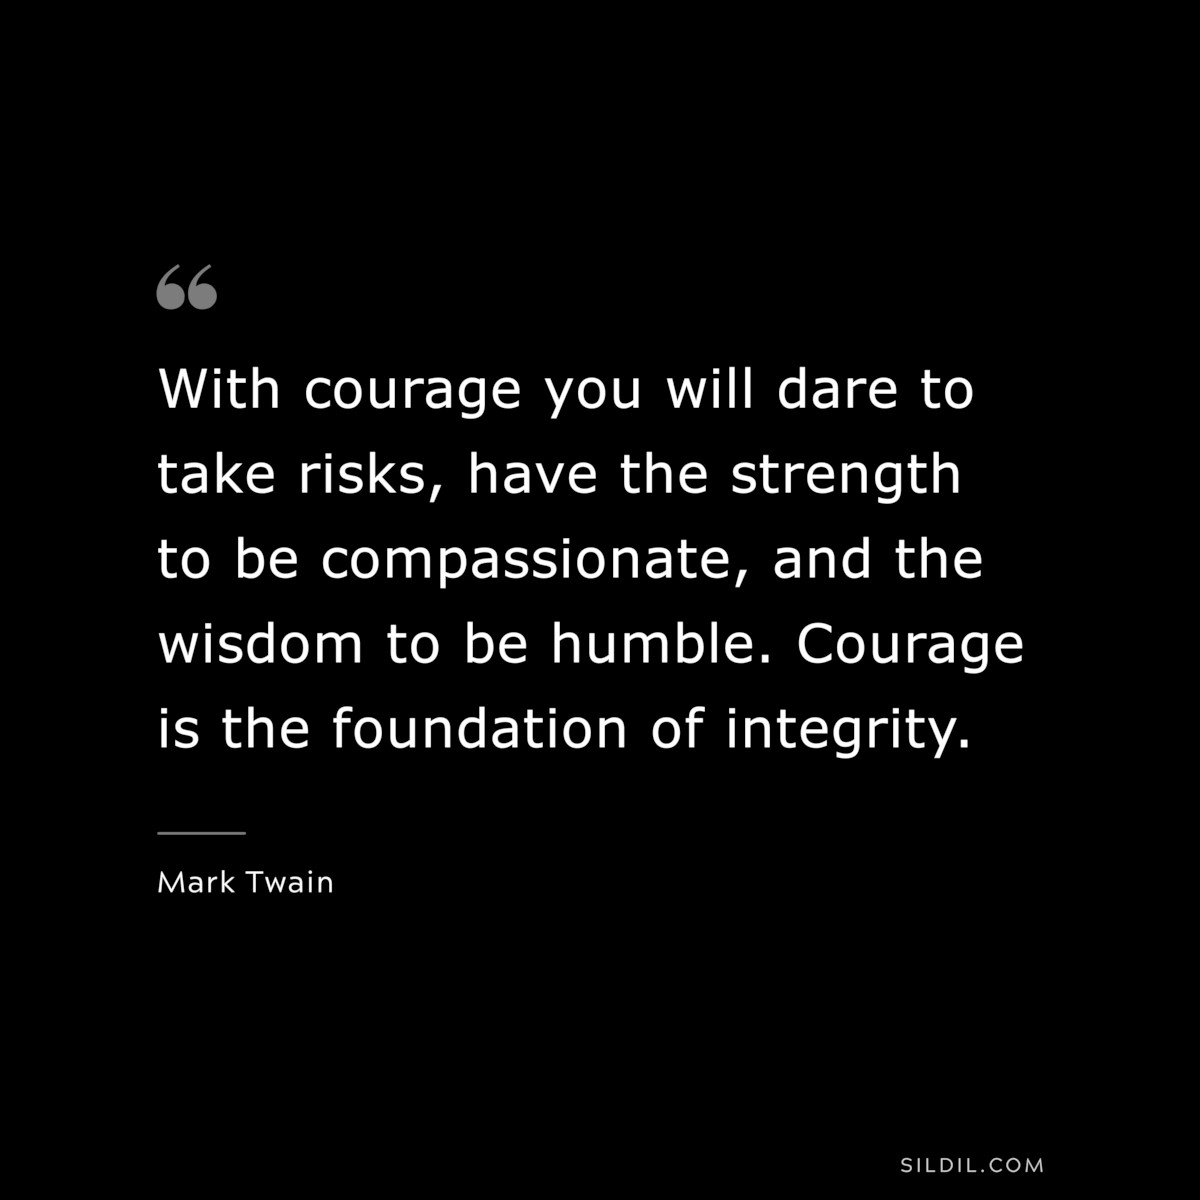 With courage you will dare to take risks, have the strength to be compassionate, and the wisdom to be humble. Courage is the foundation of integrity. ― Mark Twain